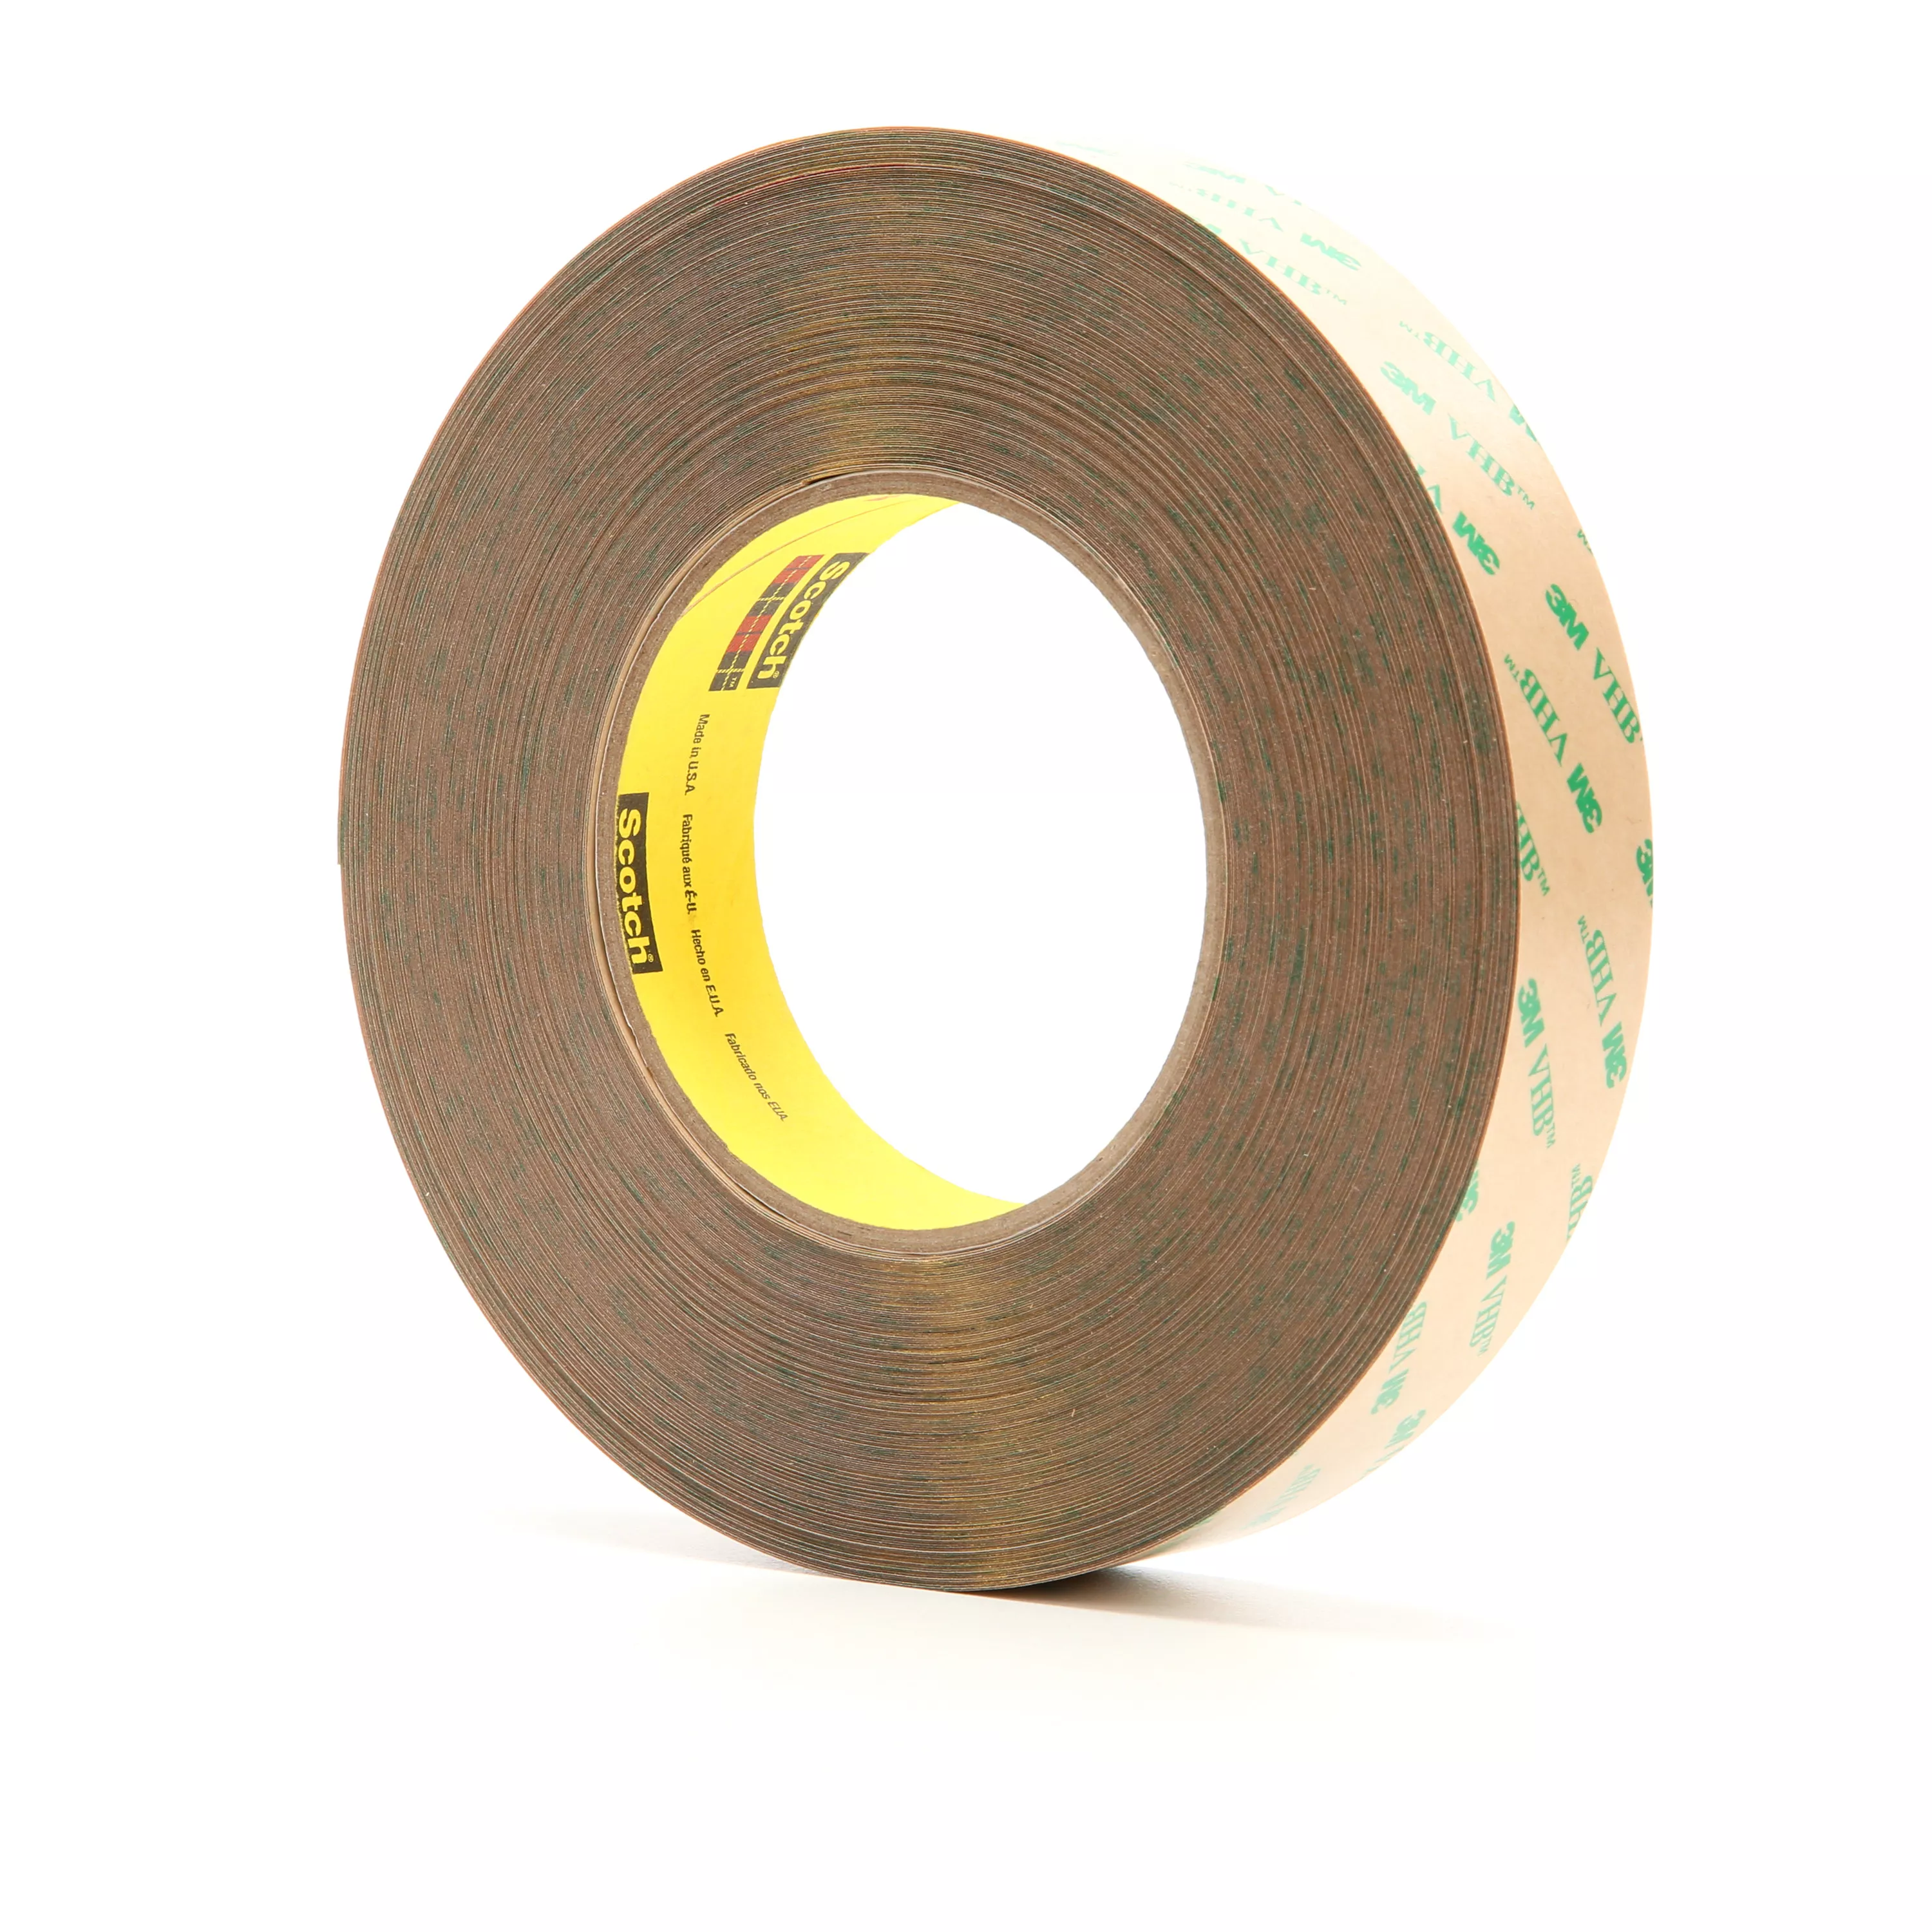 3M™ VHB™ Adhesive Transfer Tape F9469PC, Clear, 1 in x 60 yd, 5 mil, 36
Roll/Case